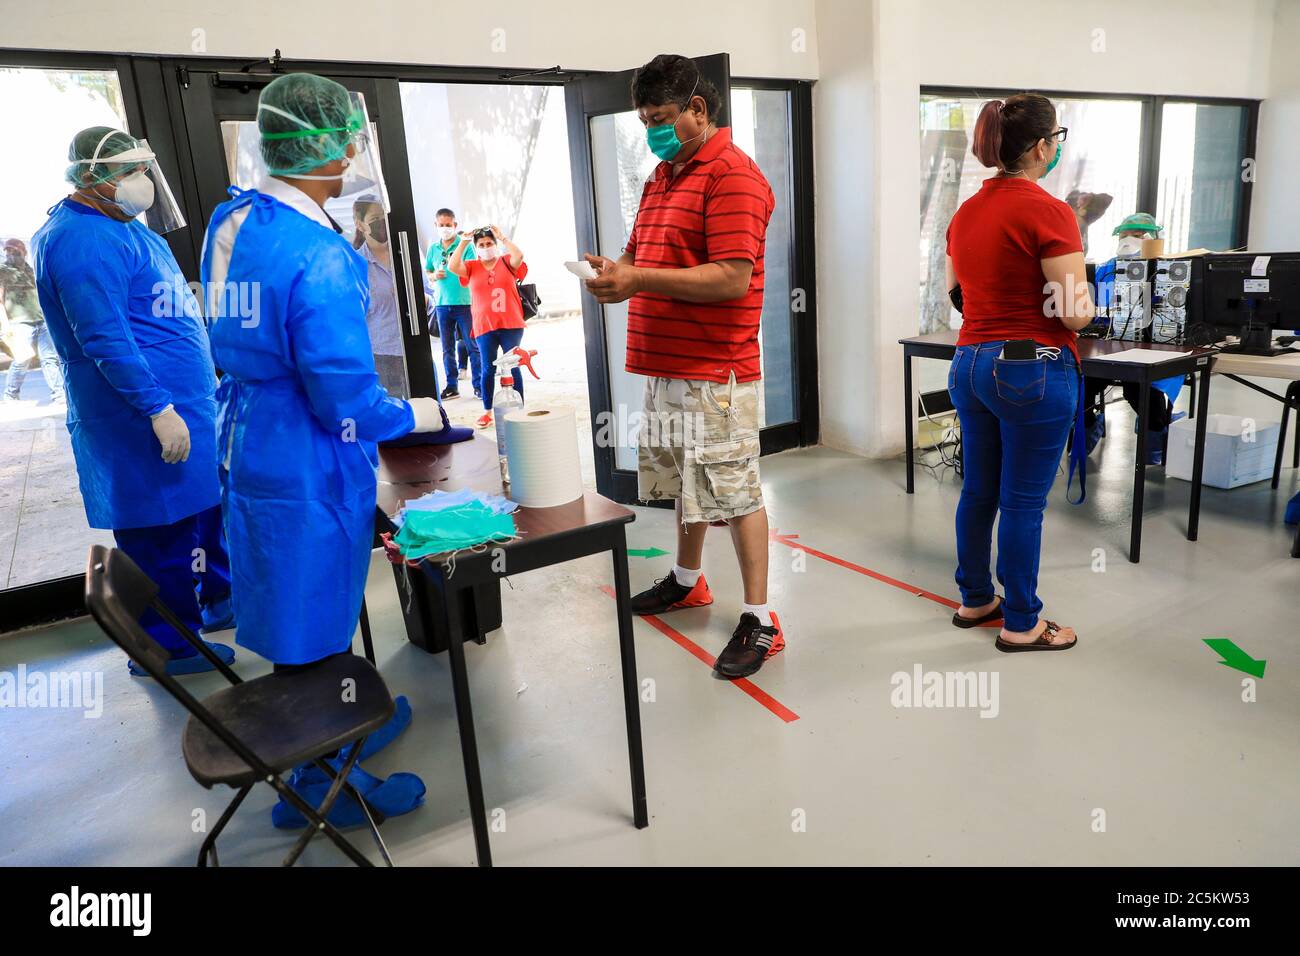 HERMOSILLO, MEXICO - JULY 3: Medical and health personnel carry out rapid tests and follow-up on people who present symptoms of covid-19 in the facilities of the Arena Sonora, which has led to the red alert due to the increase in cases in the state of Sonora on July 3, 2020 in Hermosillo, Mexico. (Luis Gutierrez / Norte Photo /) Sanitize, sanitizer, Sanitizar, sanitizante  HERMOSILLO, MEXICO - JULY 3: Medical and health personnel carry out rapid tests and follow-up on people who present symptoms of covid-19 in the facilities of the Arena Sonora, which has led to the red alert due to the increa Stock Photo